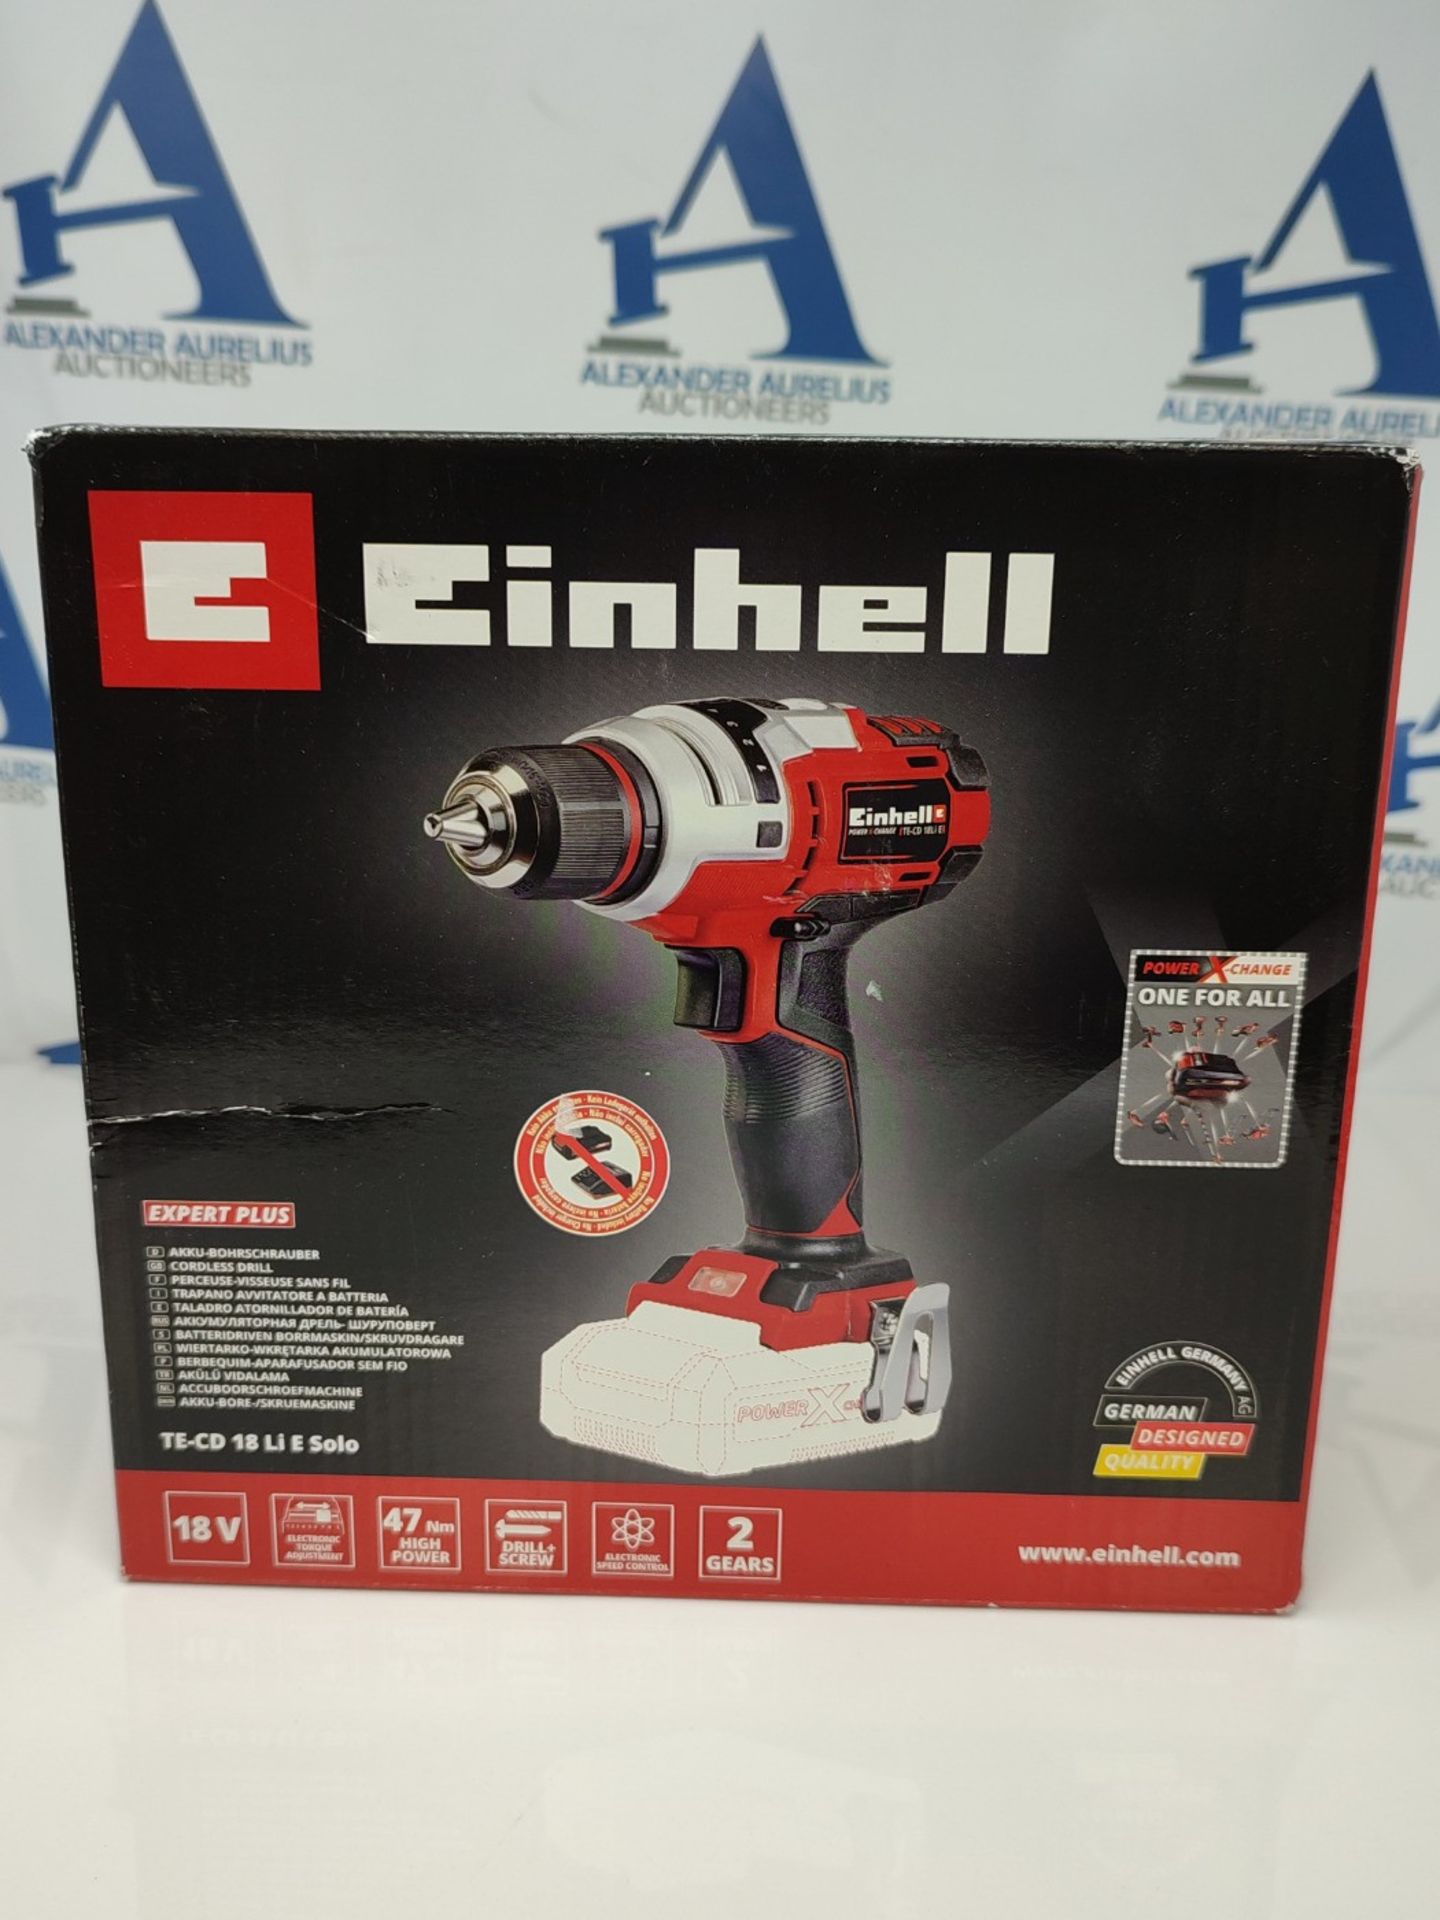 RRP £56.00 Einhell Cordless Drill Driver TE-CD 18 Li E - Solo Power X-Change (Lithium Ion, 2-spee - Image 2 of 3